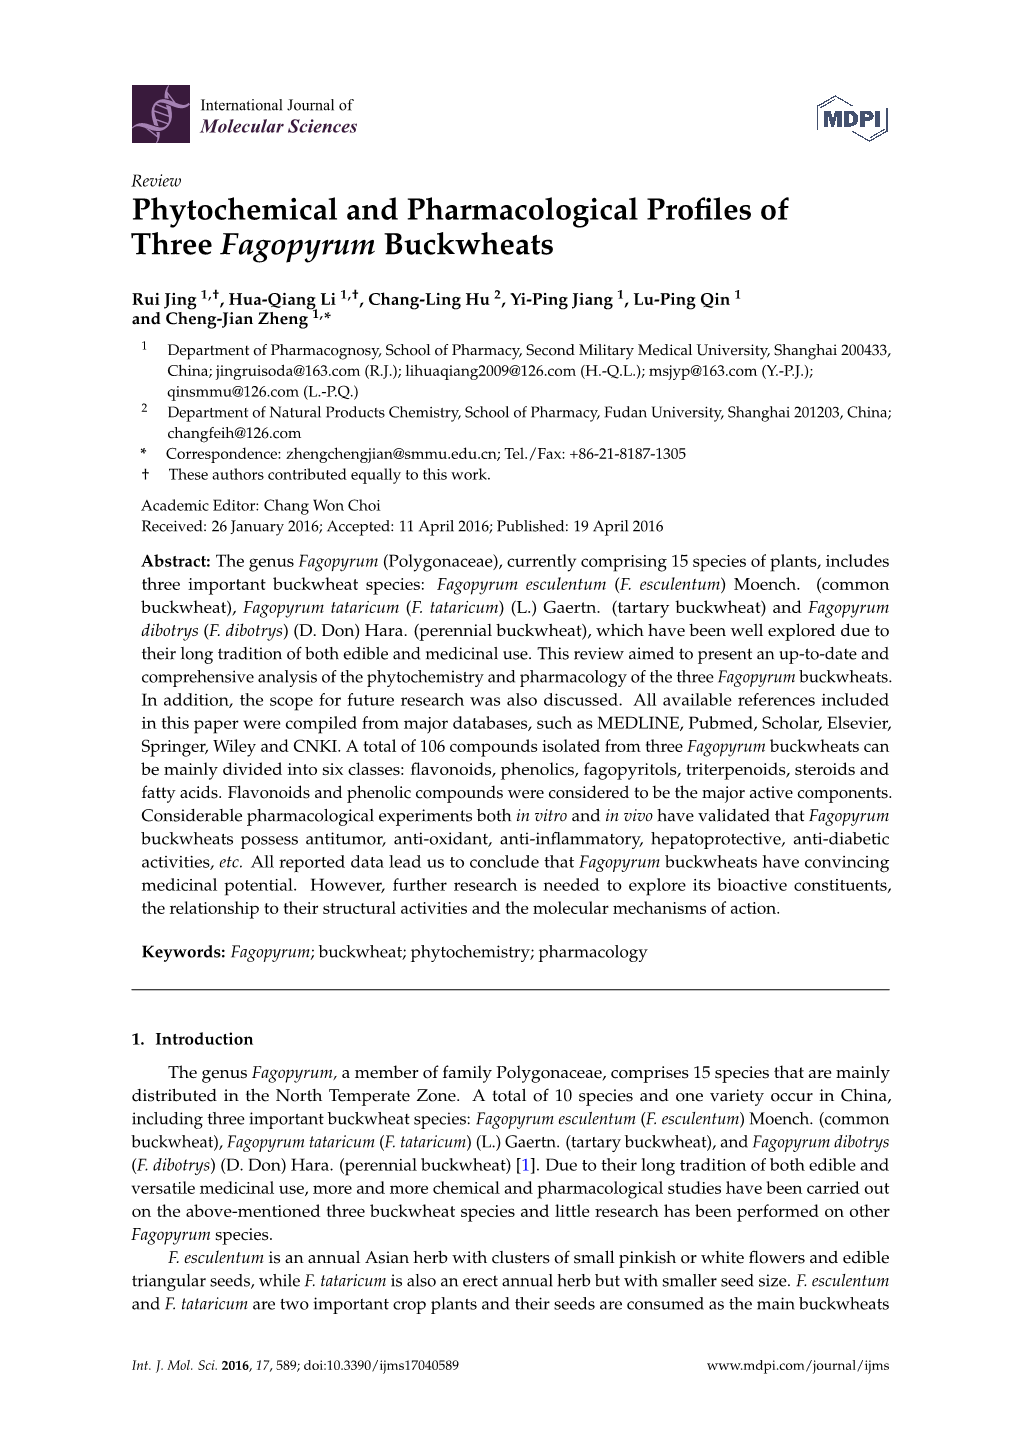 Phytochemical and Pharmacological Profiles of Three Fagopyrum Buckwheats